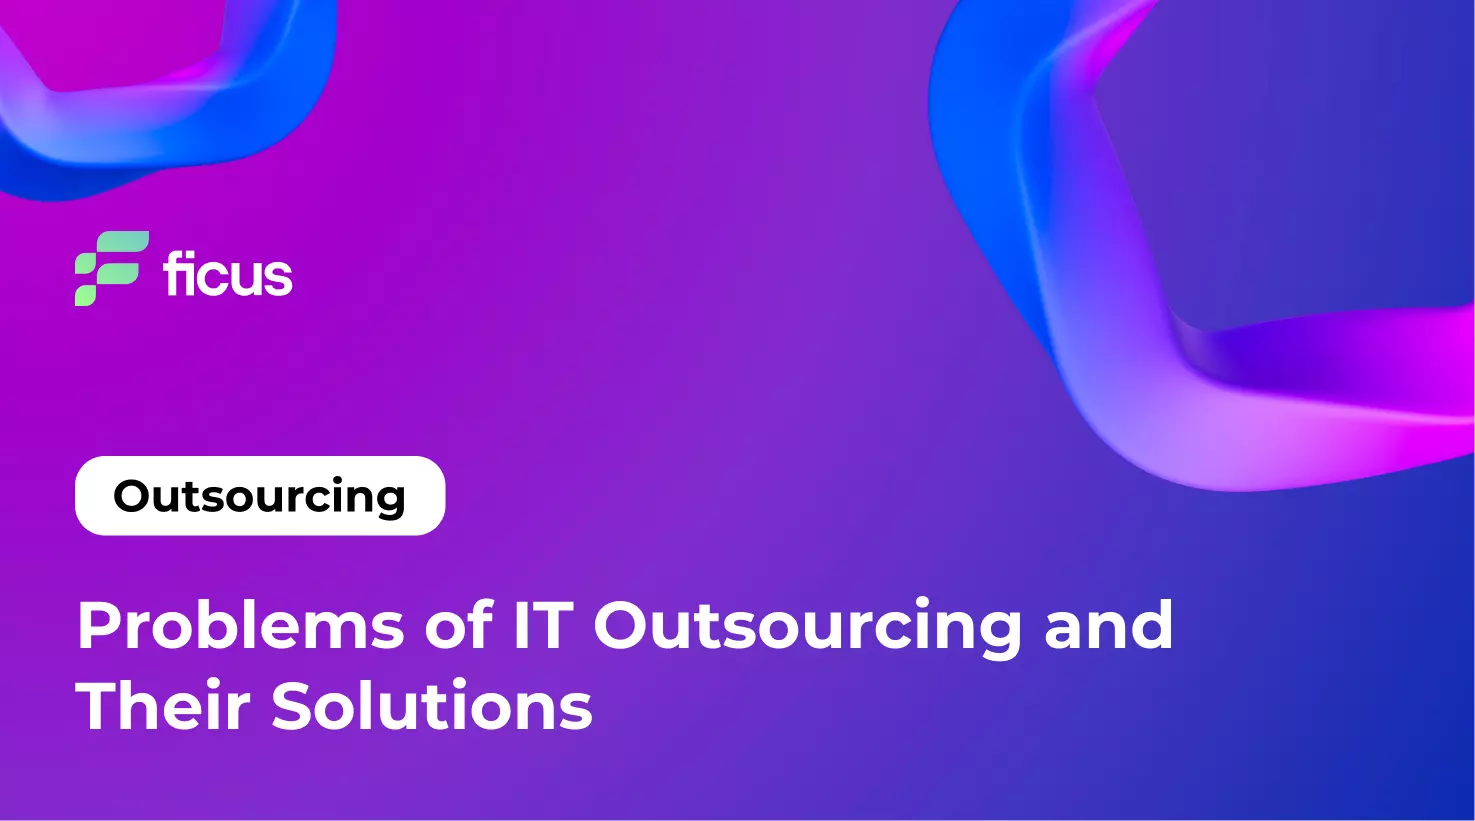 Problems of IT Outsourcing and Their Solutions